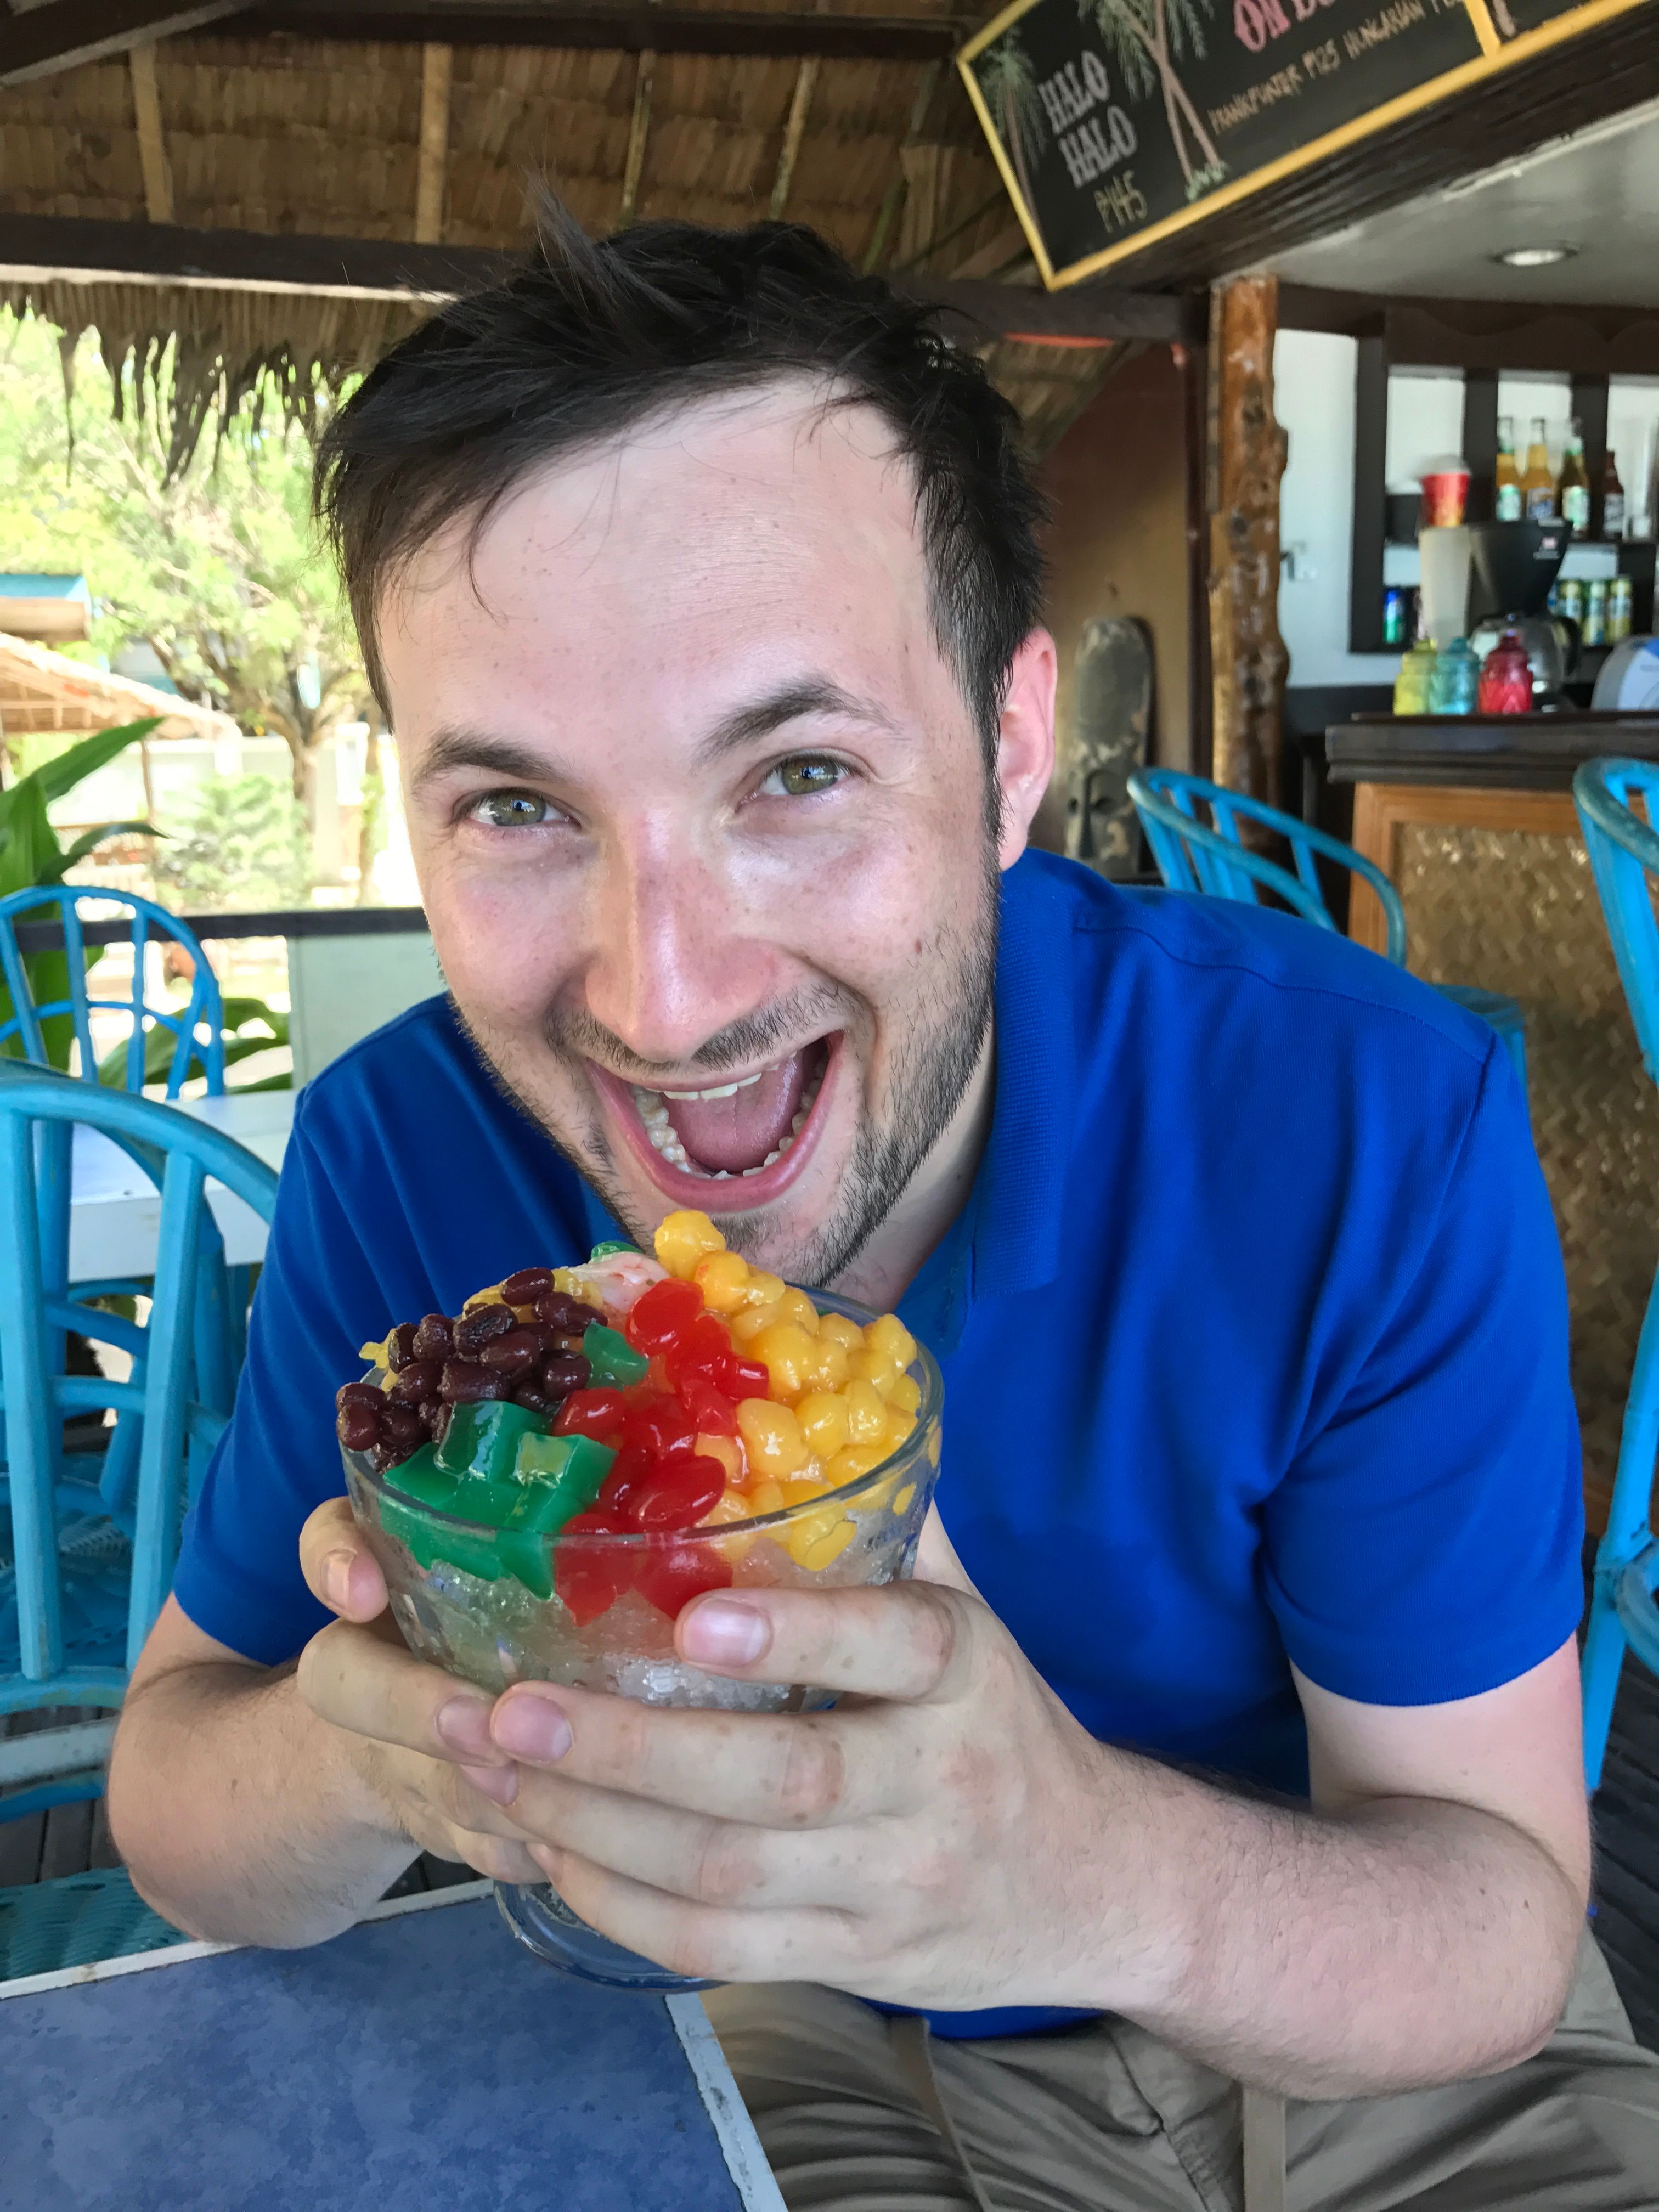 Enjoying a Halo-Halo in the Philippines